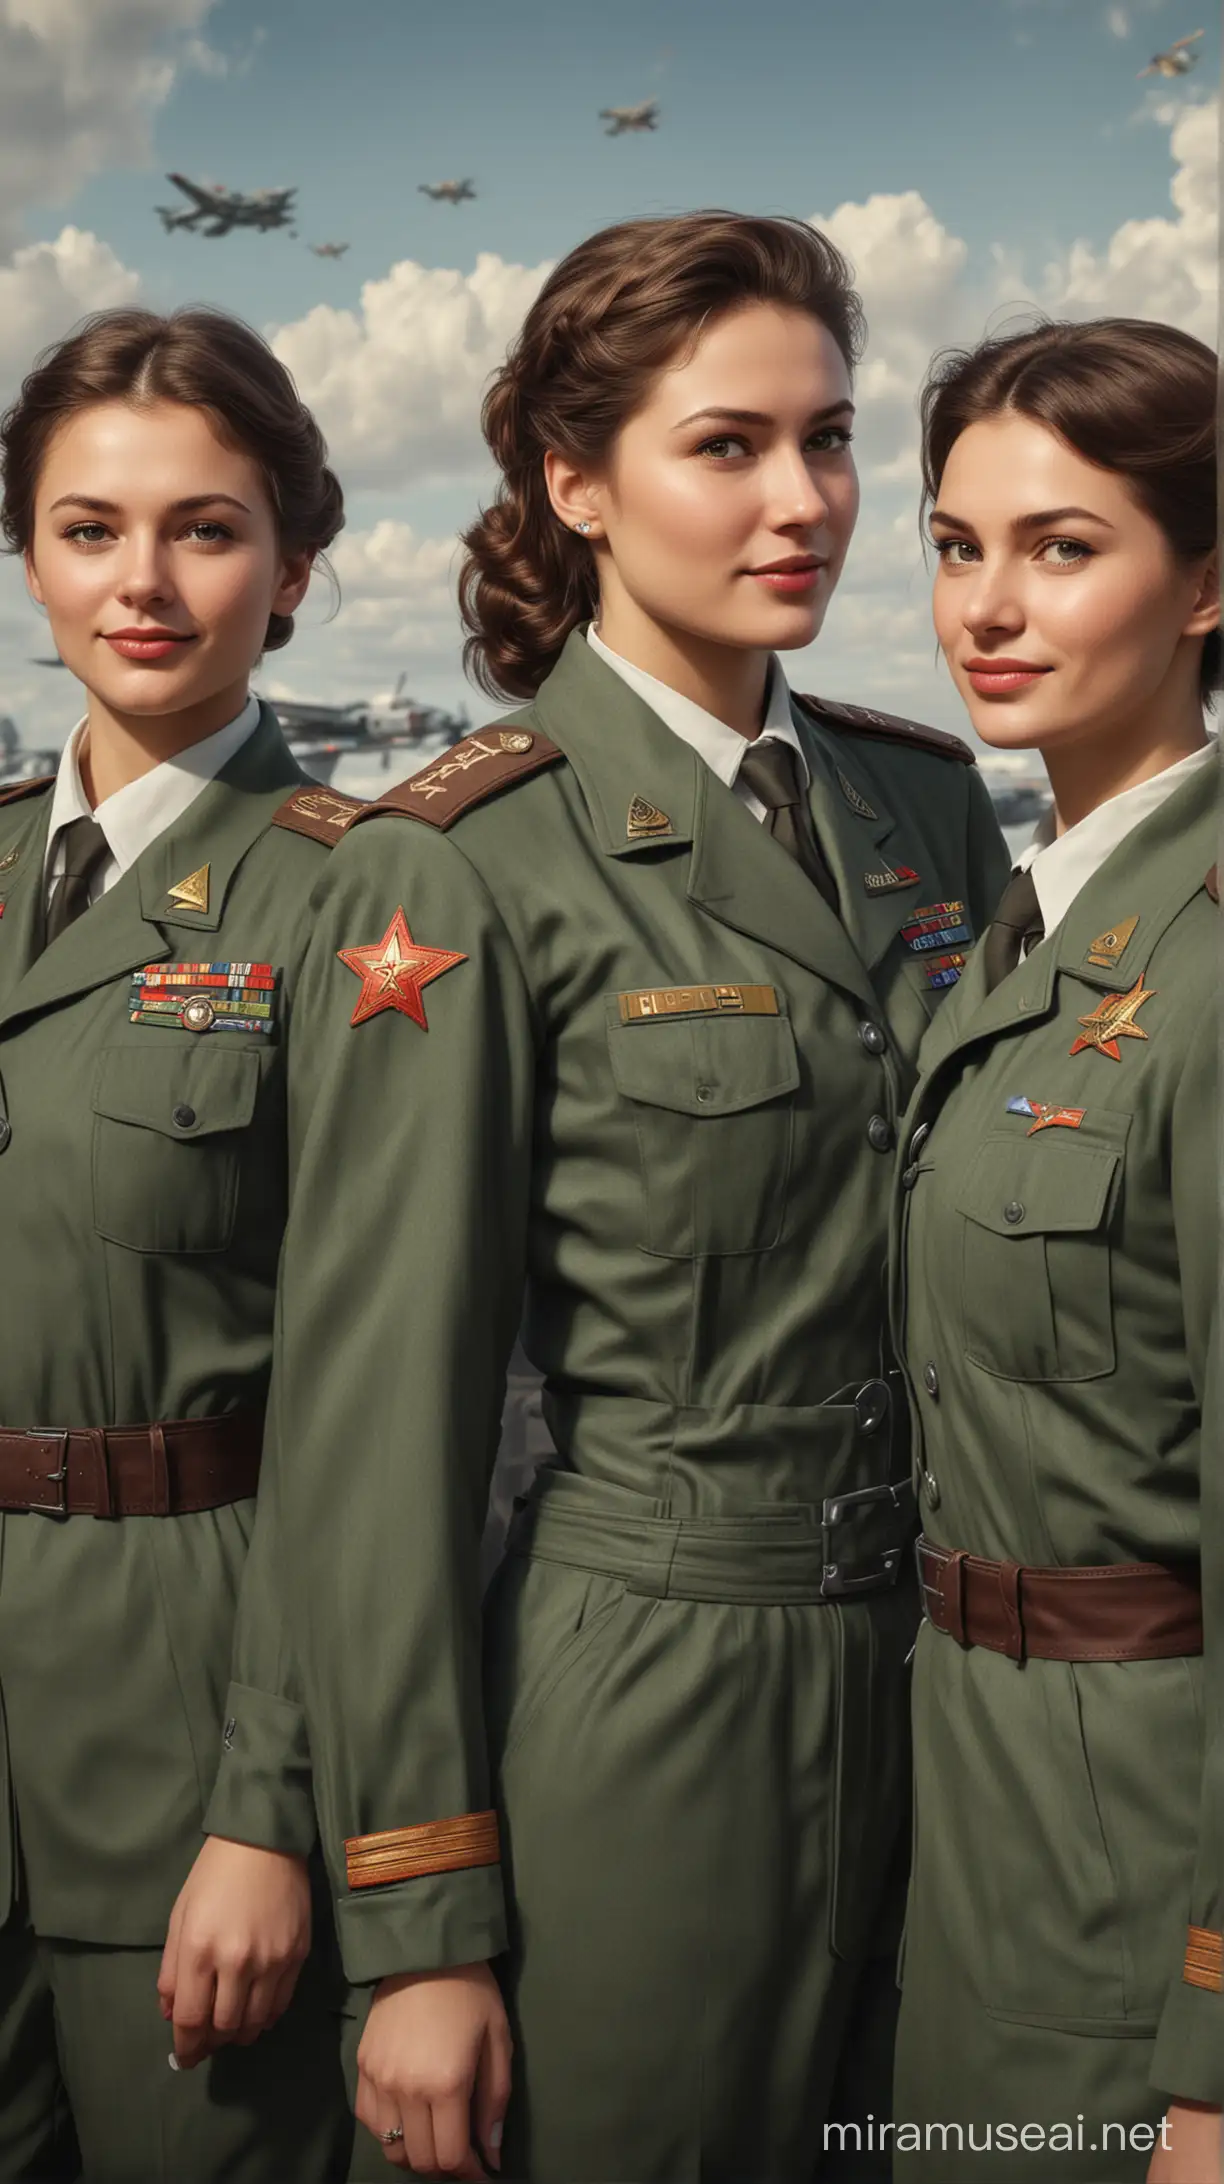 Soviet Officials Recruiting Female Pilots for AllFemale Squadron